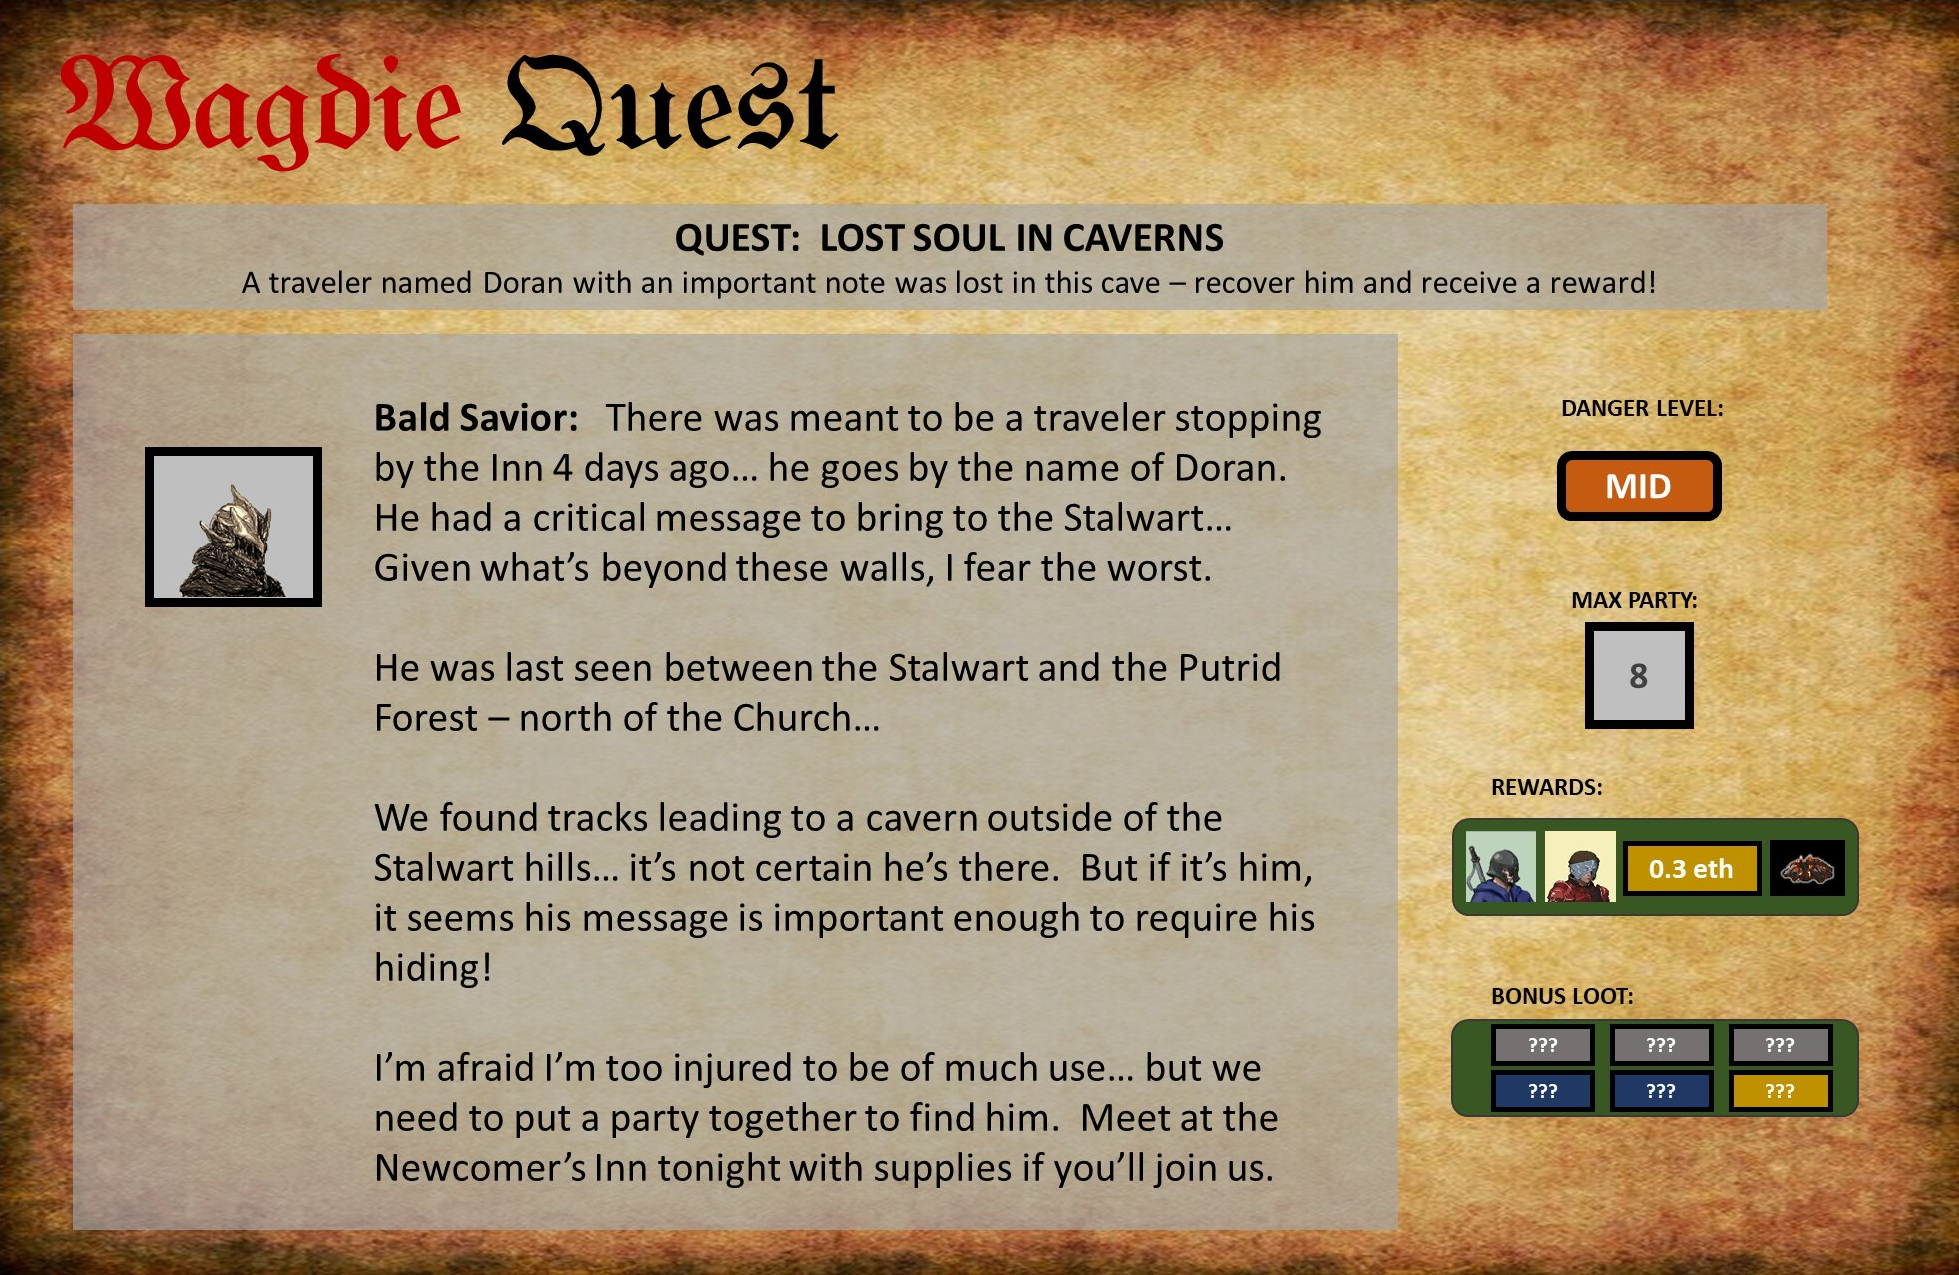 wagdie_quest_01.png